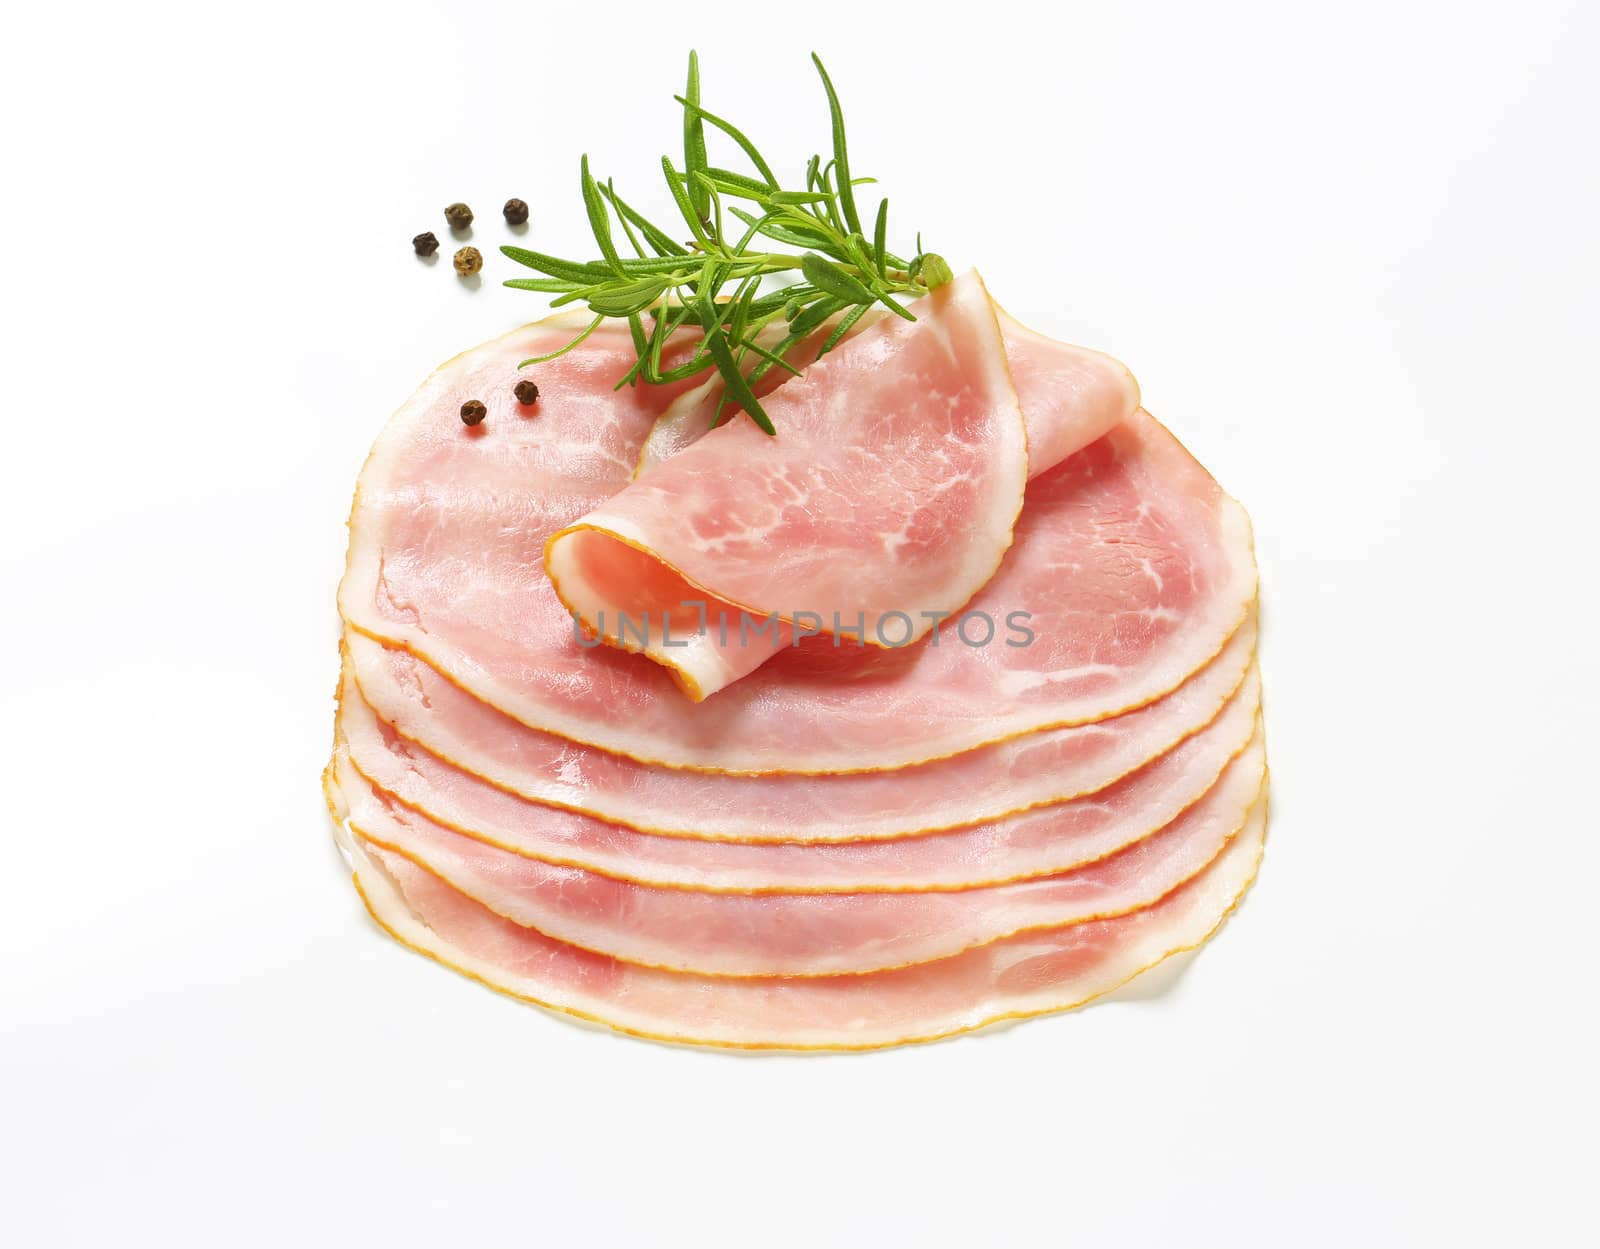 Thin slices of cooked ham on white background